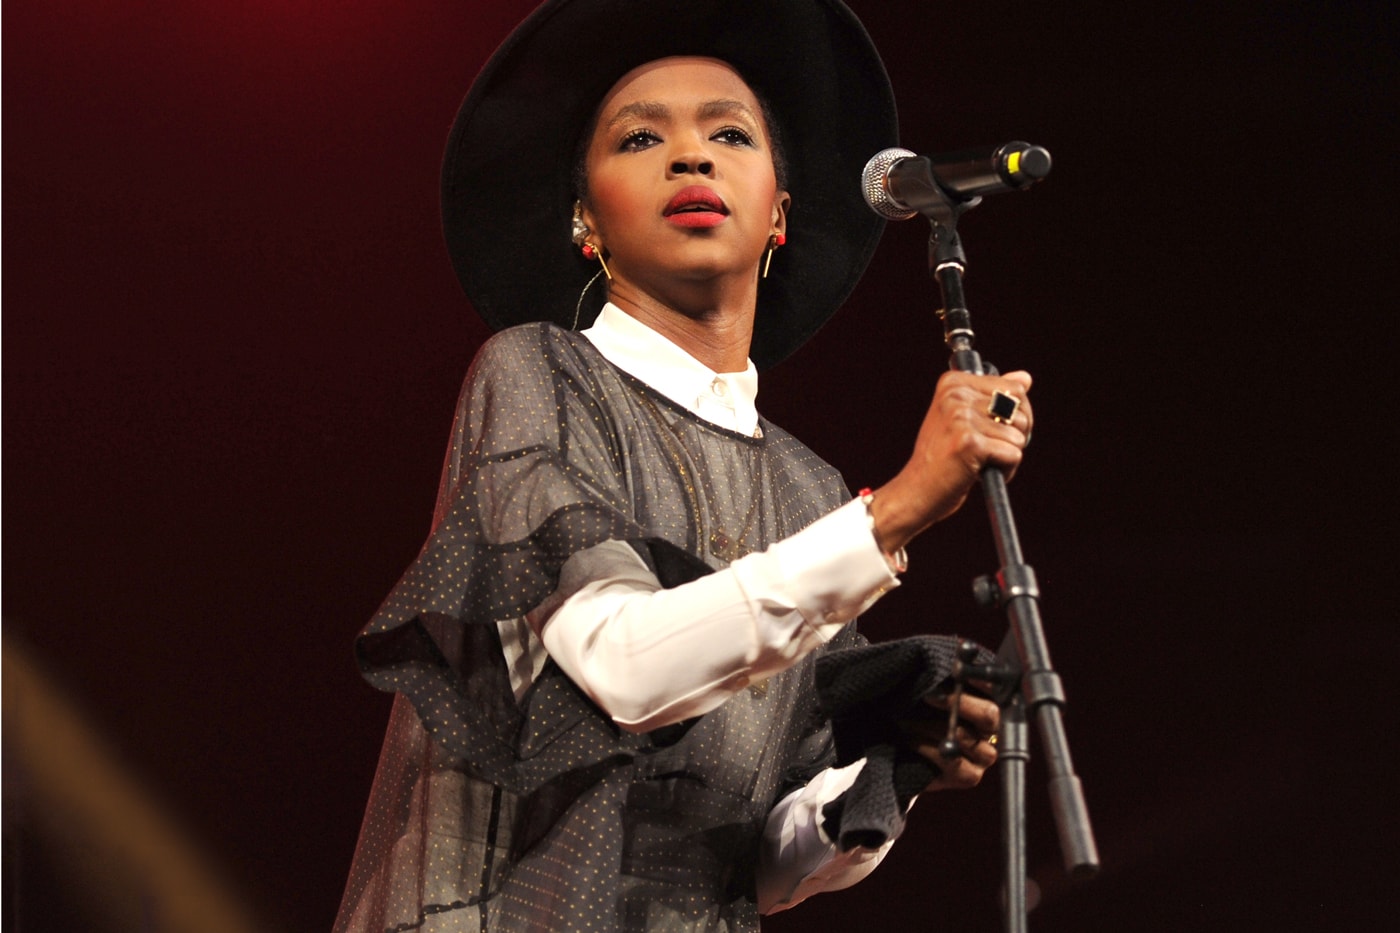 Lauryn Hill Joins The Weeknd for "In The Night" Live on Jimmy Fallon